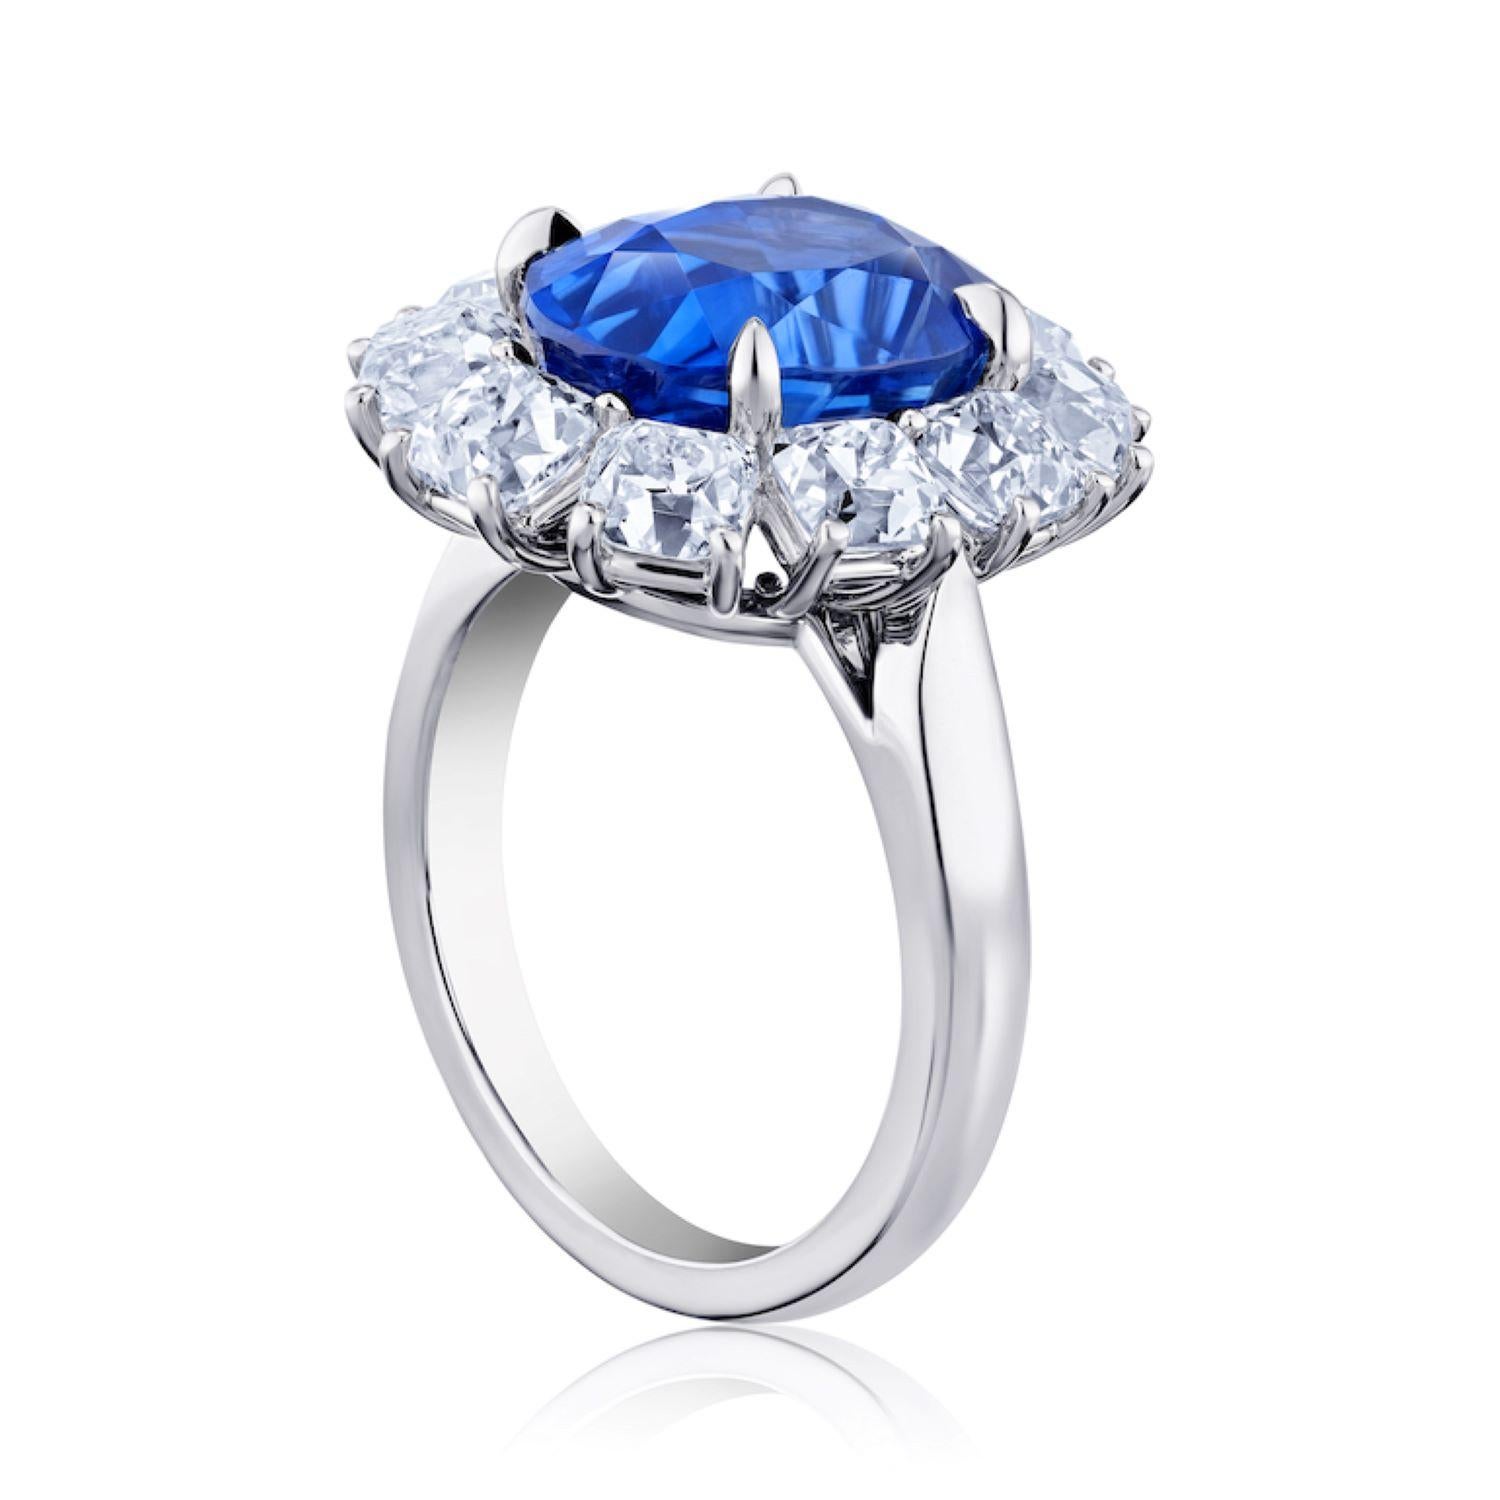 7.43 carat Oval Blue Sapphire with ten Old Miner Diamonds 4.10 carats set in a Platinum ring